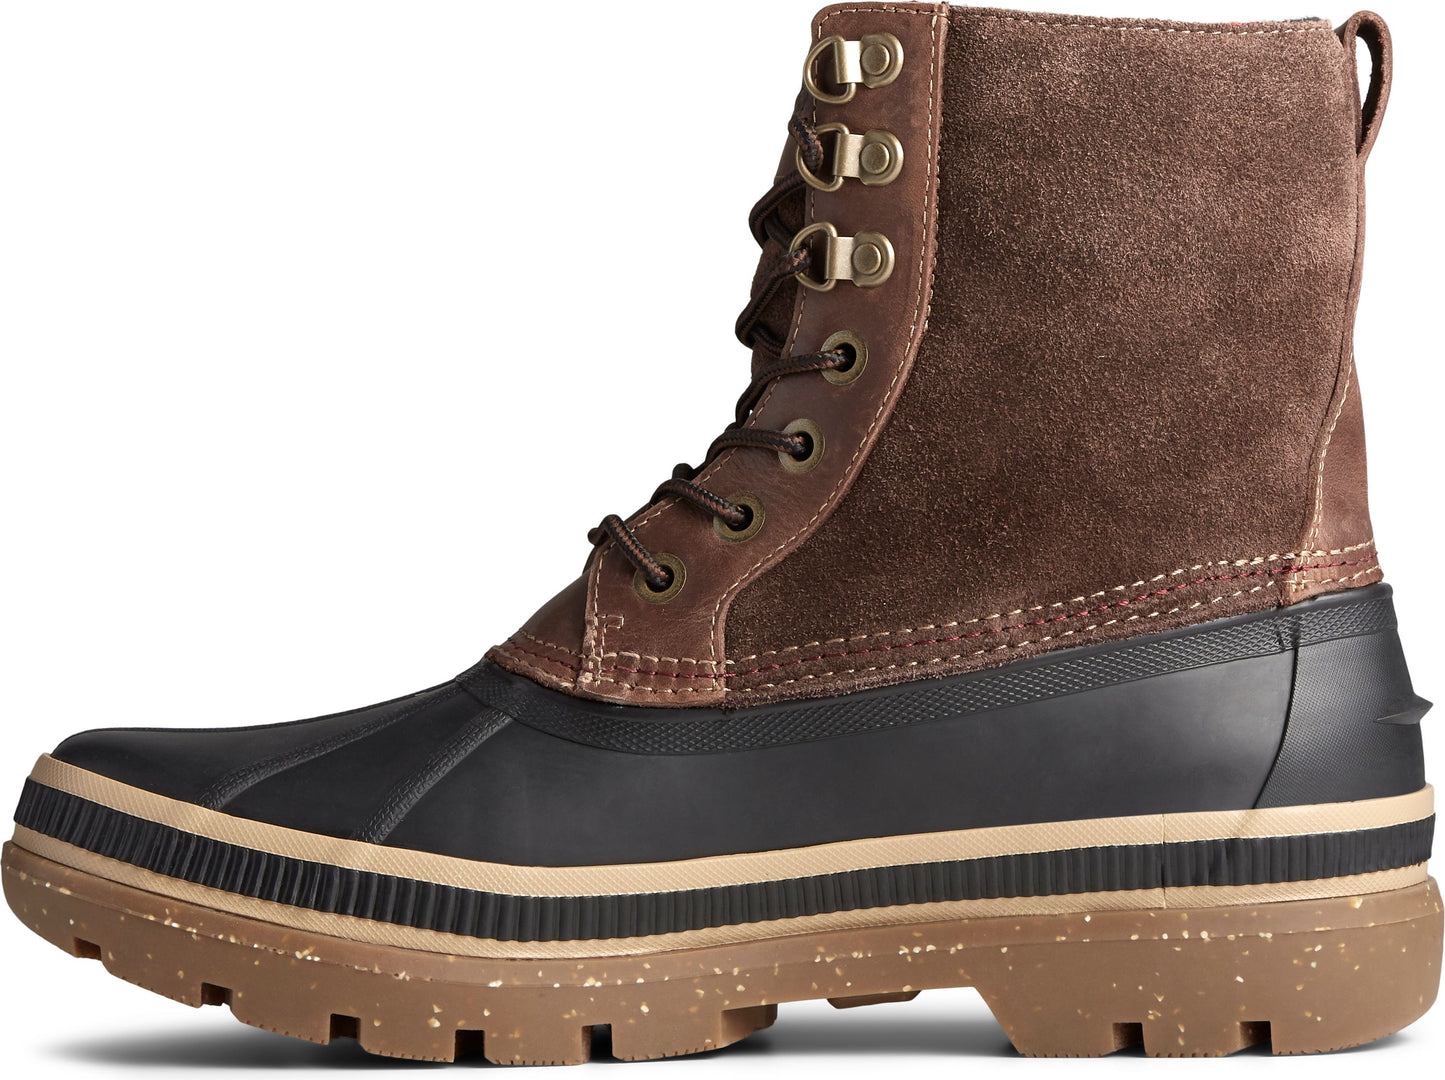 Sperry Boots Ice Bay Boot Black & Tan